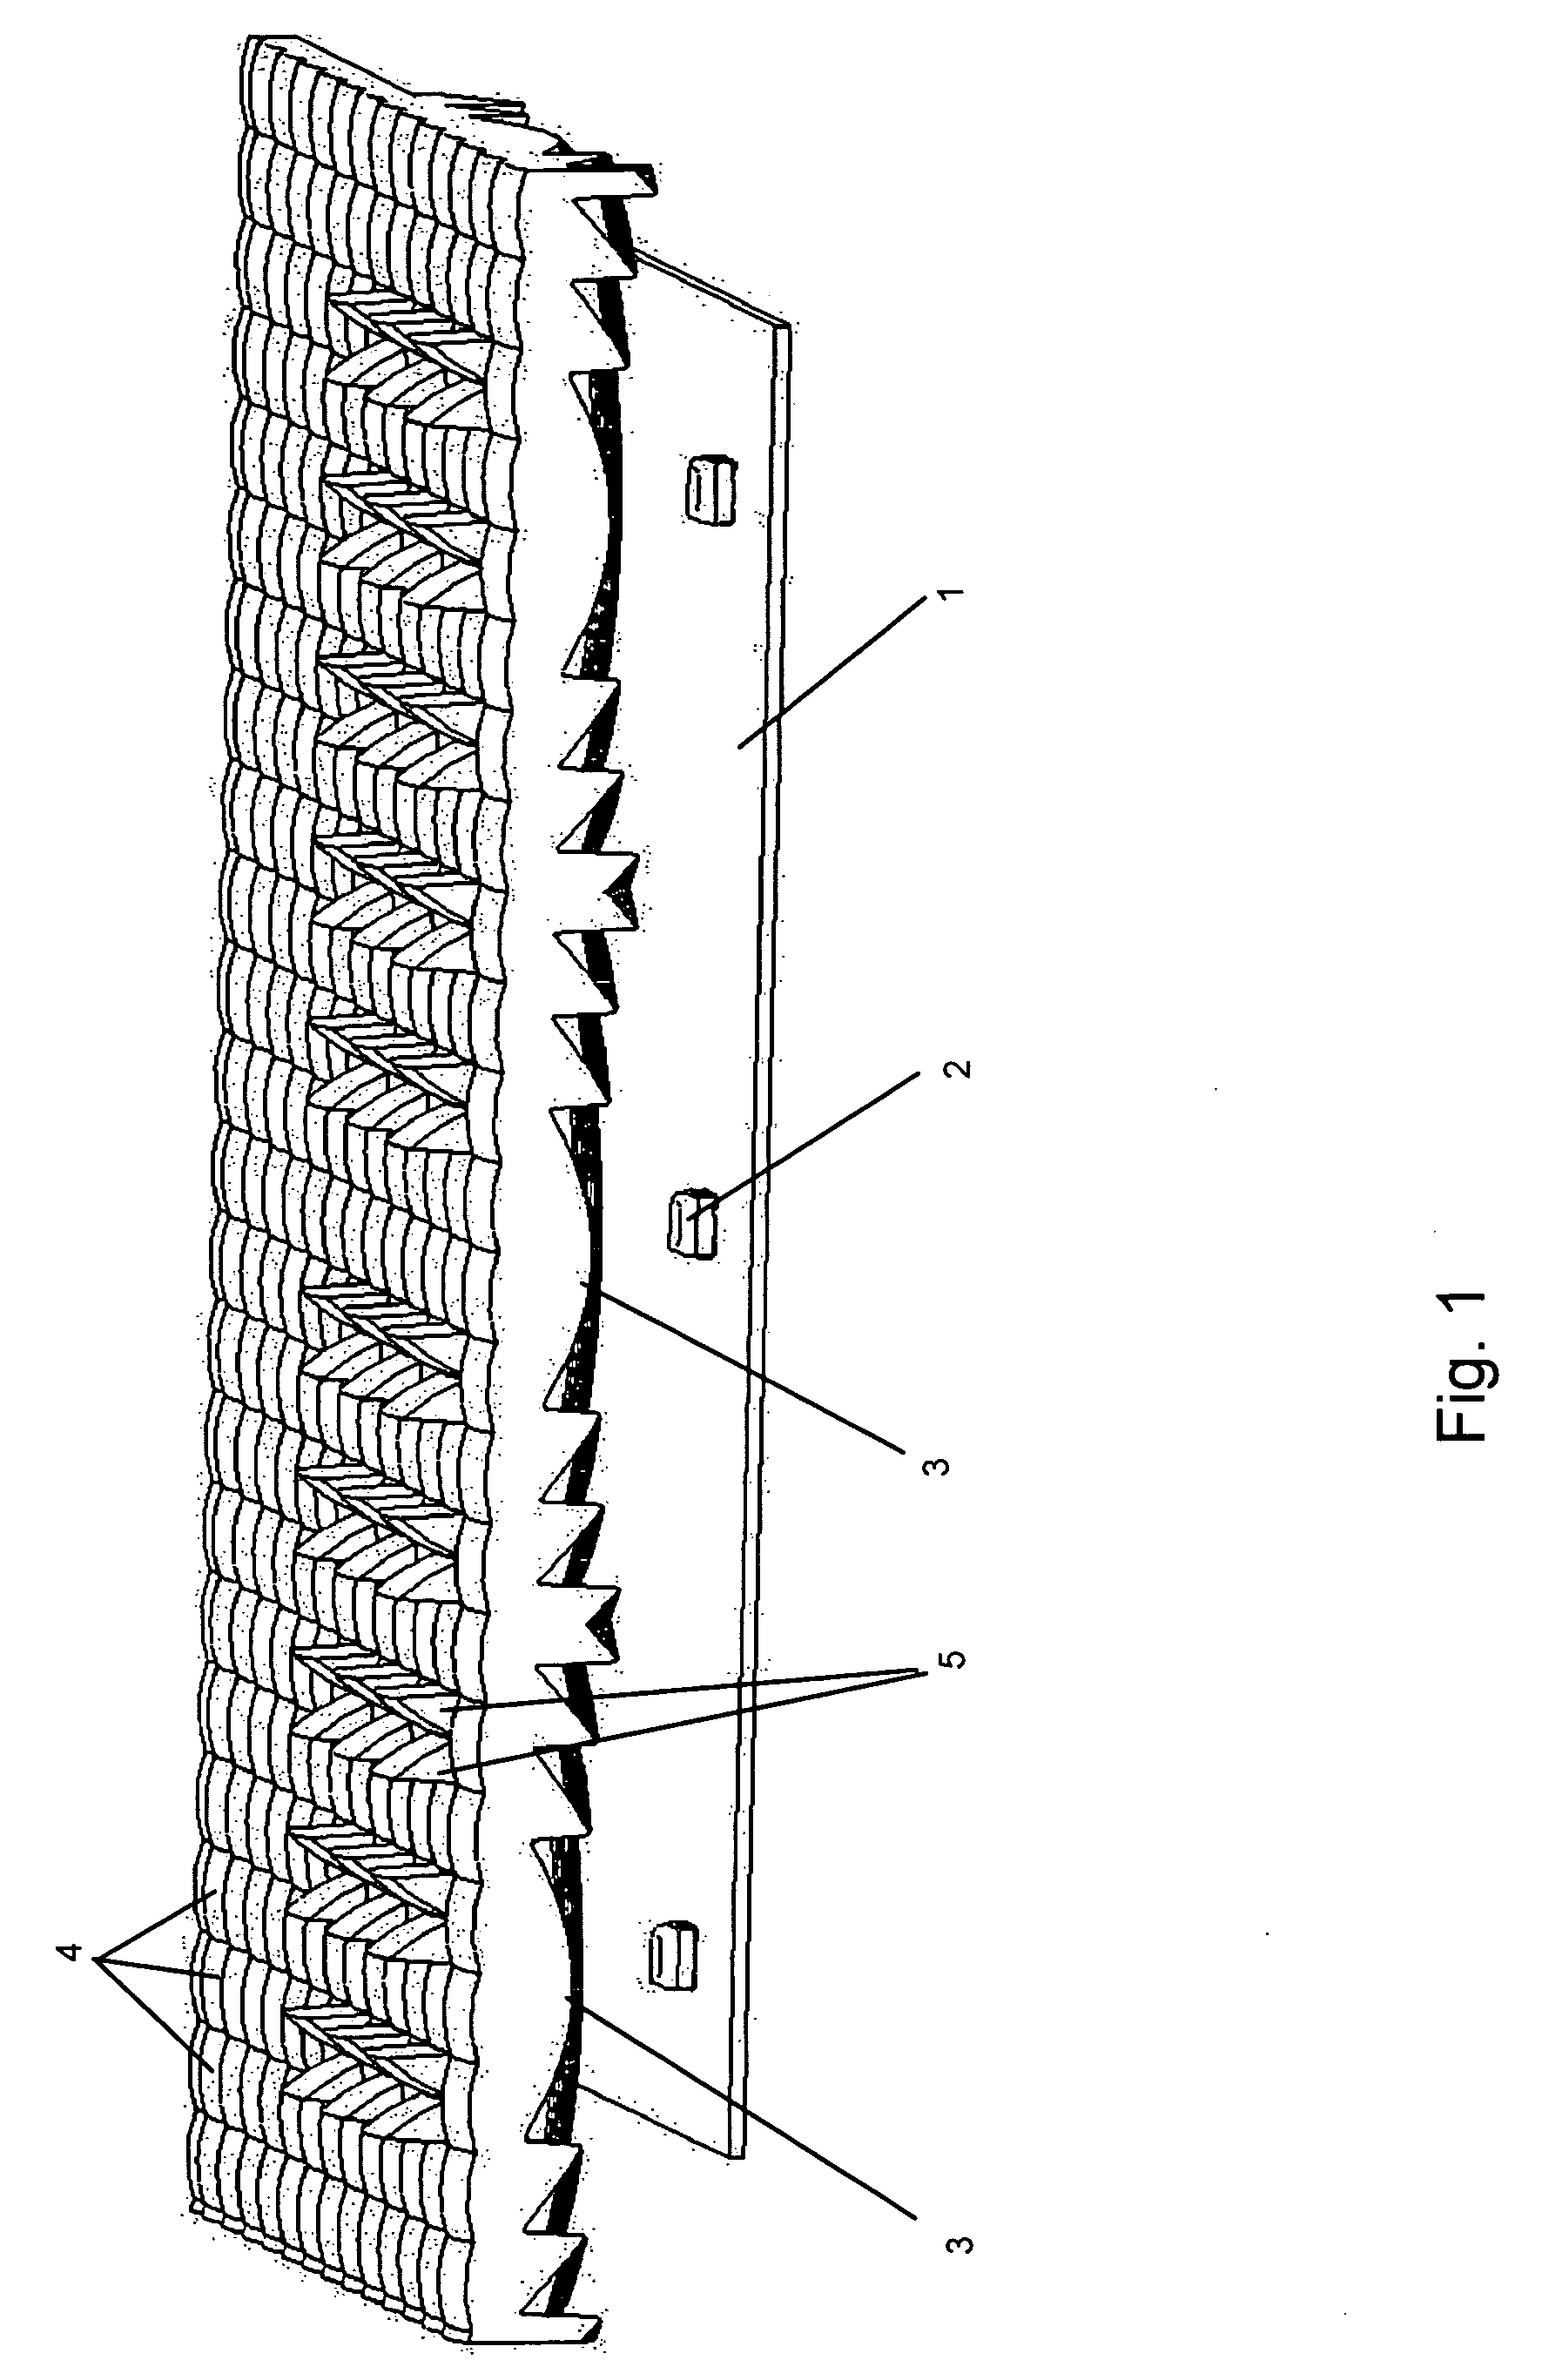 Method and apparatus for creating optical images